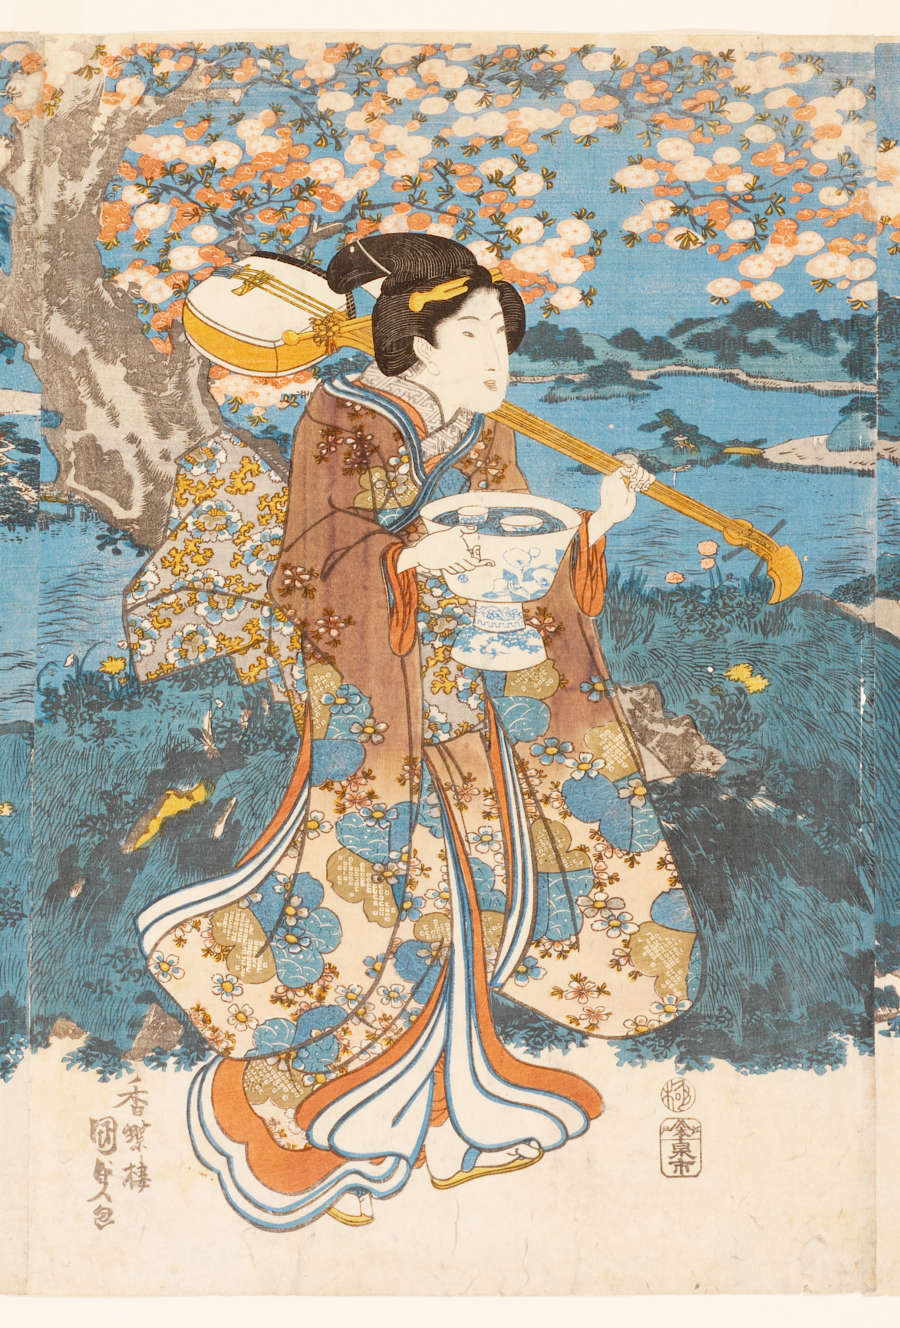 A woodblock print of a woman in a long-sleeved robe. She carries a porcelain wine bowl with cups in one hand and a musical instrument in the other.